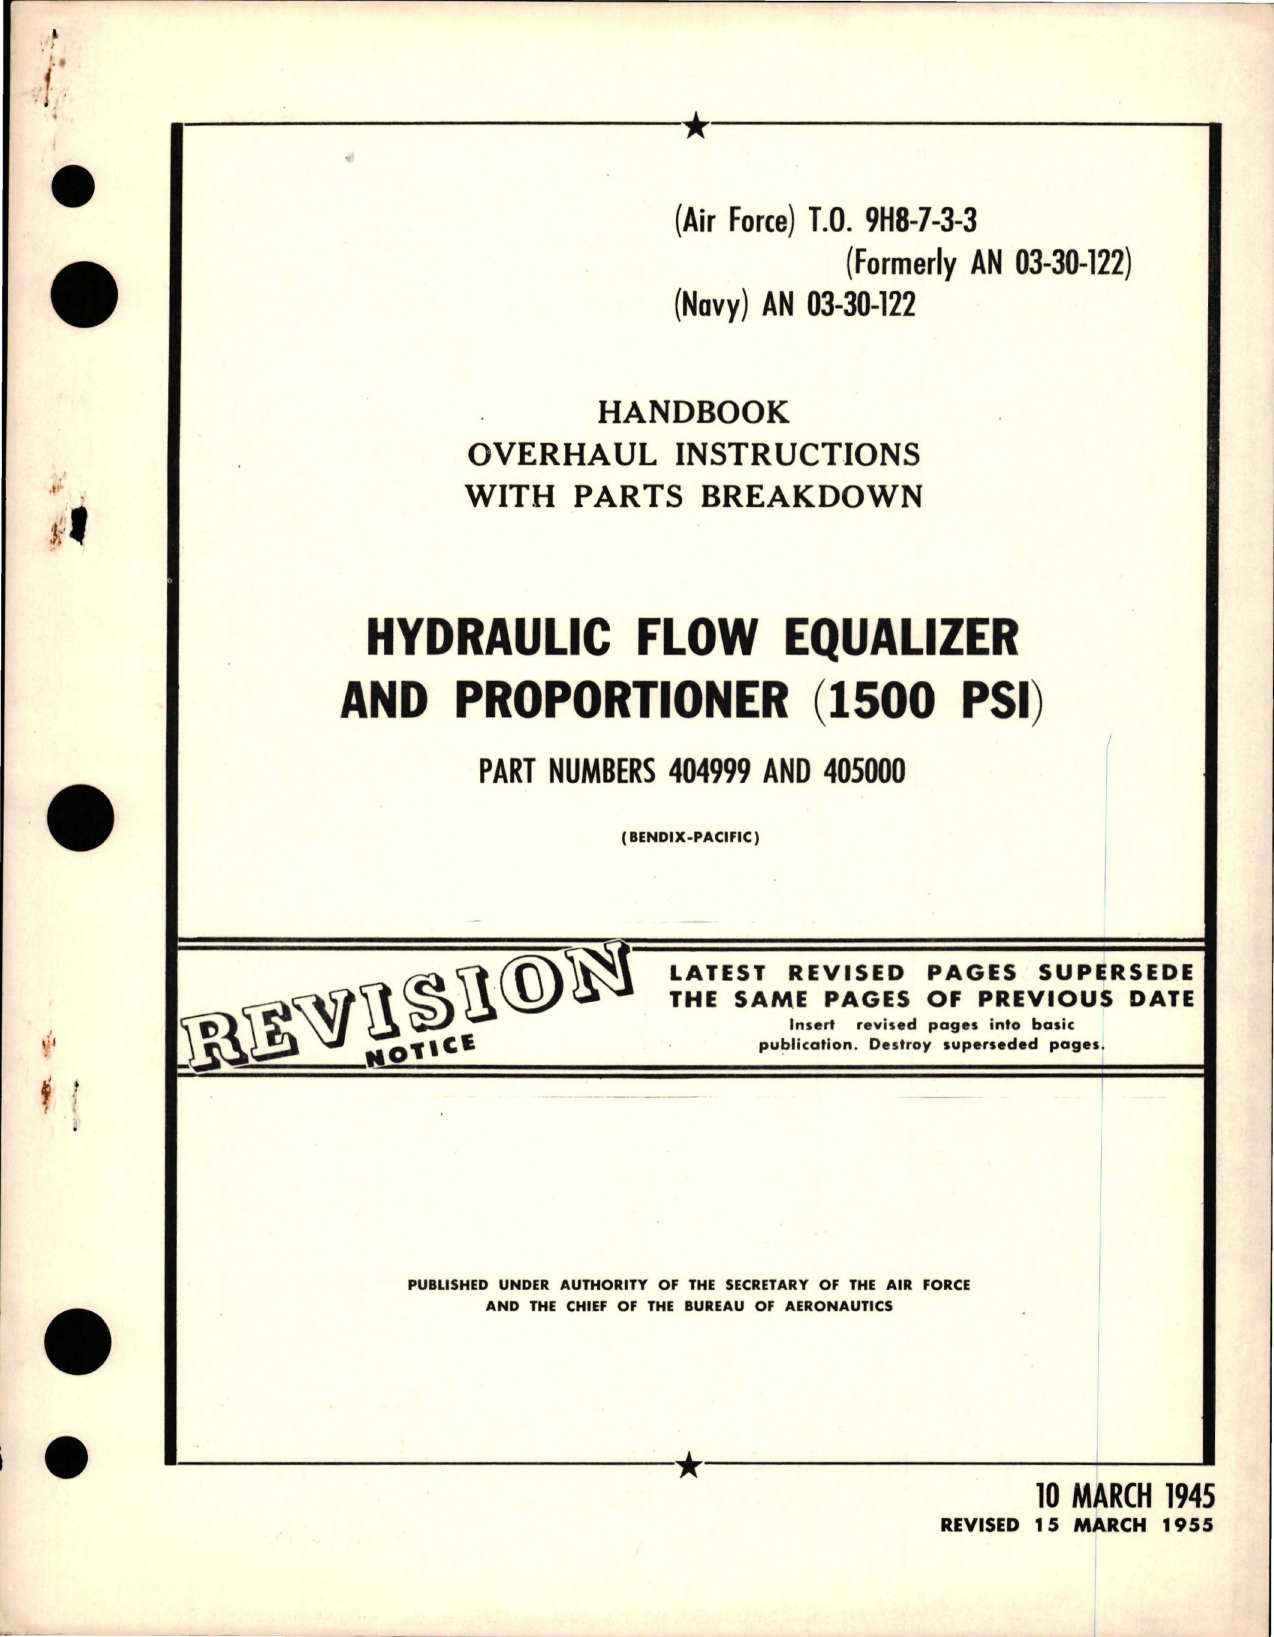 Sample page 1 from AirCorps Library document: Overhaul Instructions with Parts Breakdown for Hydraulic Flow Equalizer & Proportioner (1500 PSI) - Parts 404999 and 405000